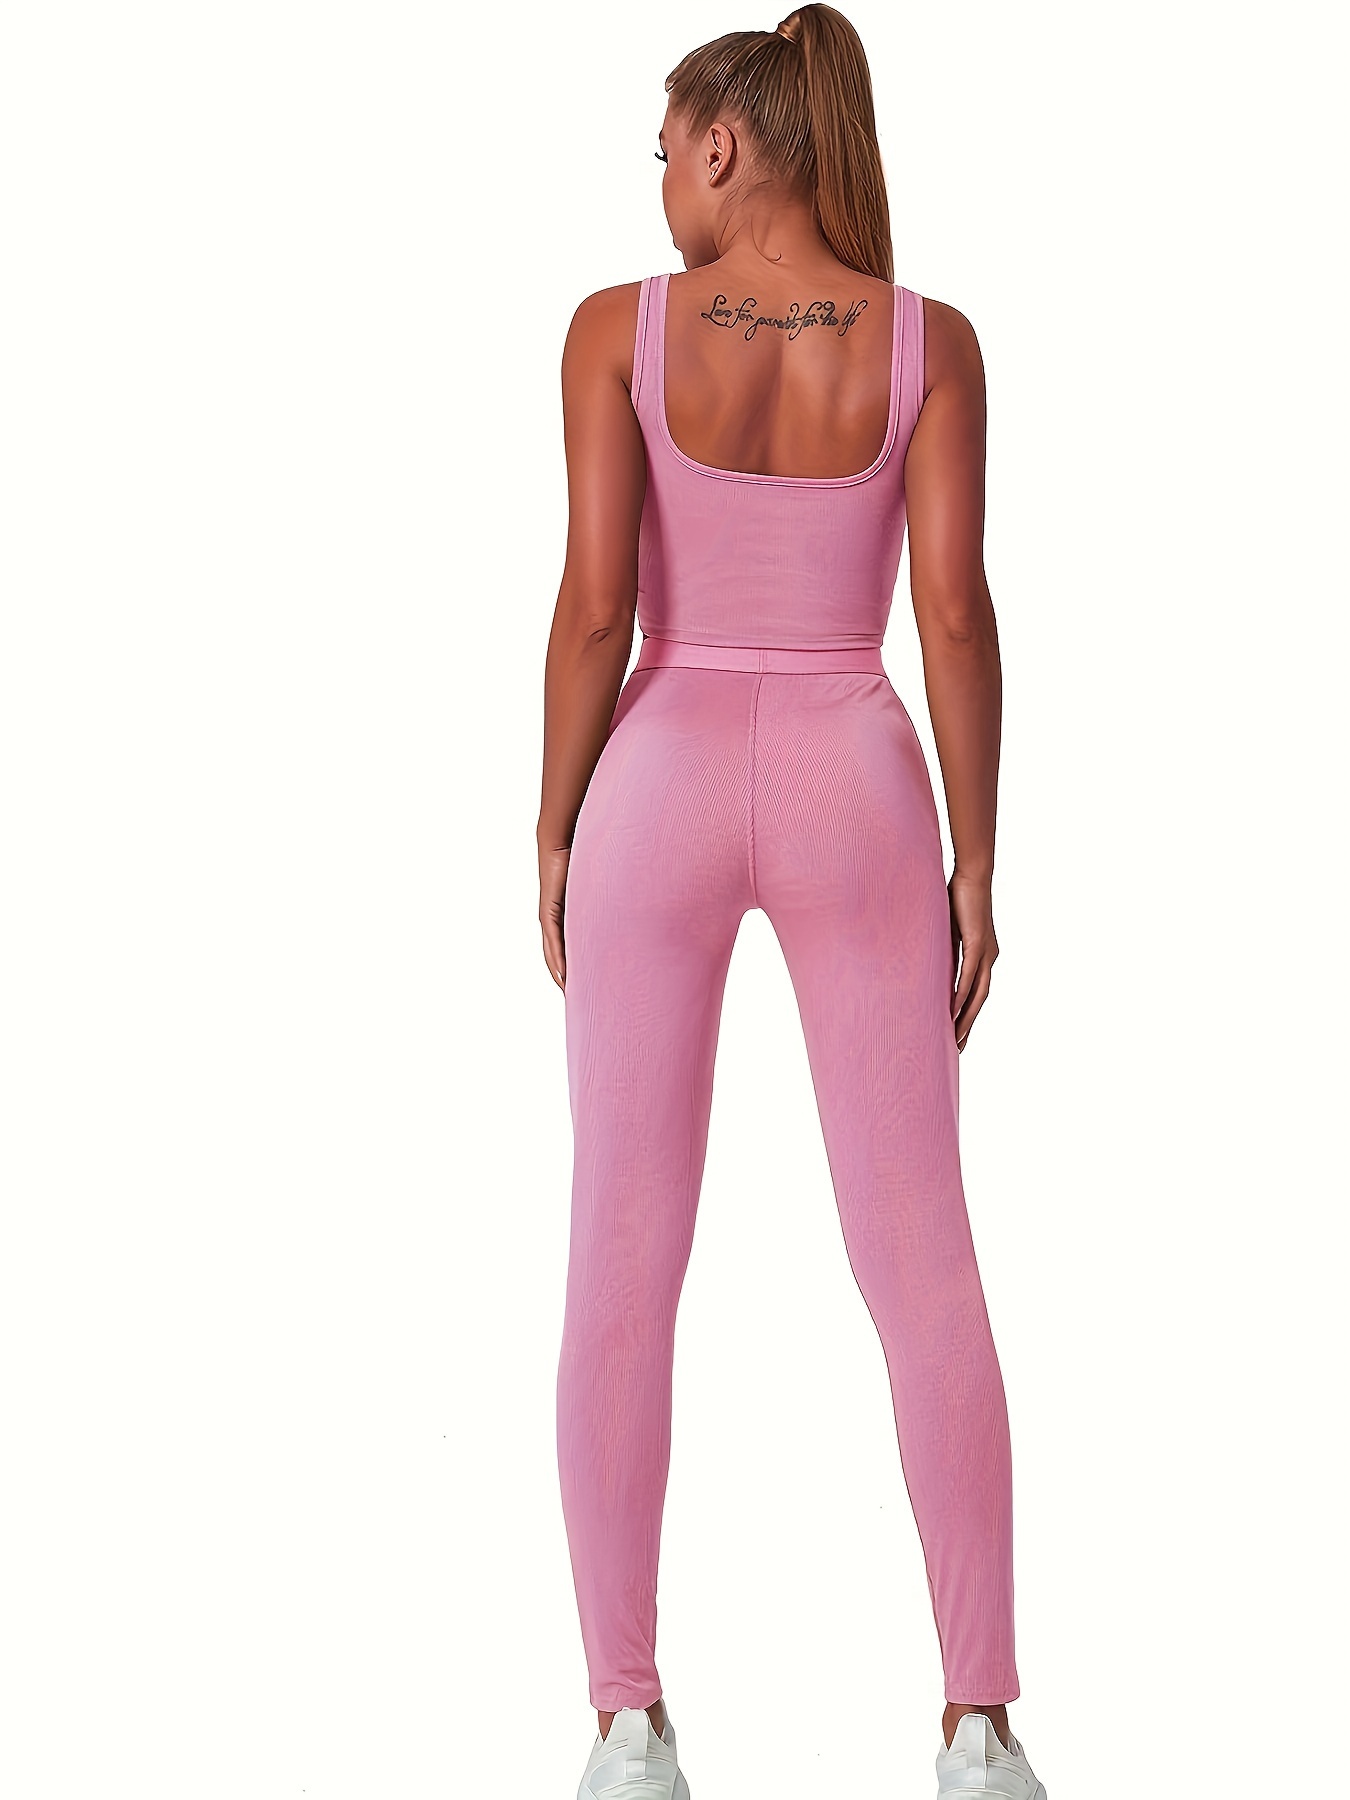 Rose Wolf Mother Yoga Outfit for Women Fashion 3D Printed Workout Leggings  Fitness Sports Gym Running Lift The Hips Yoga Pants Tank Top Yoga Set